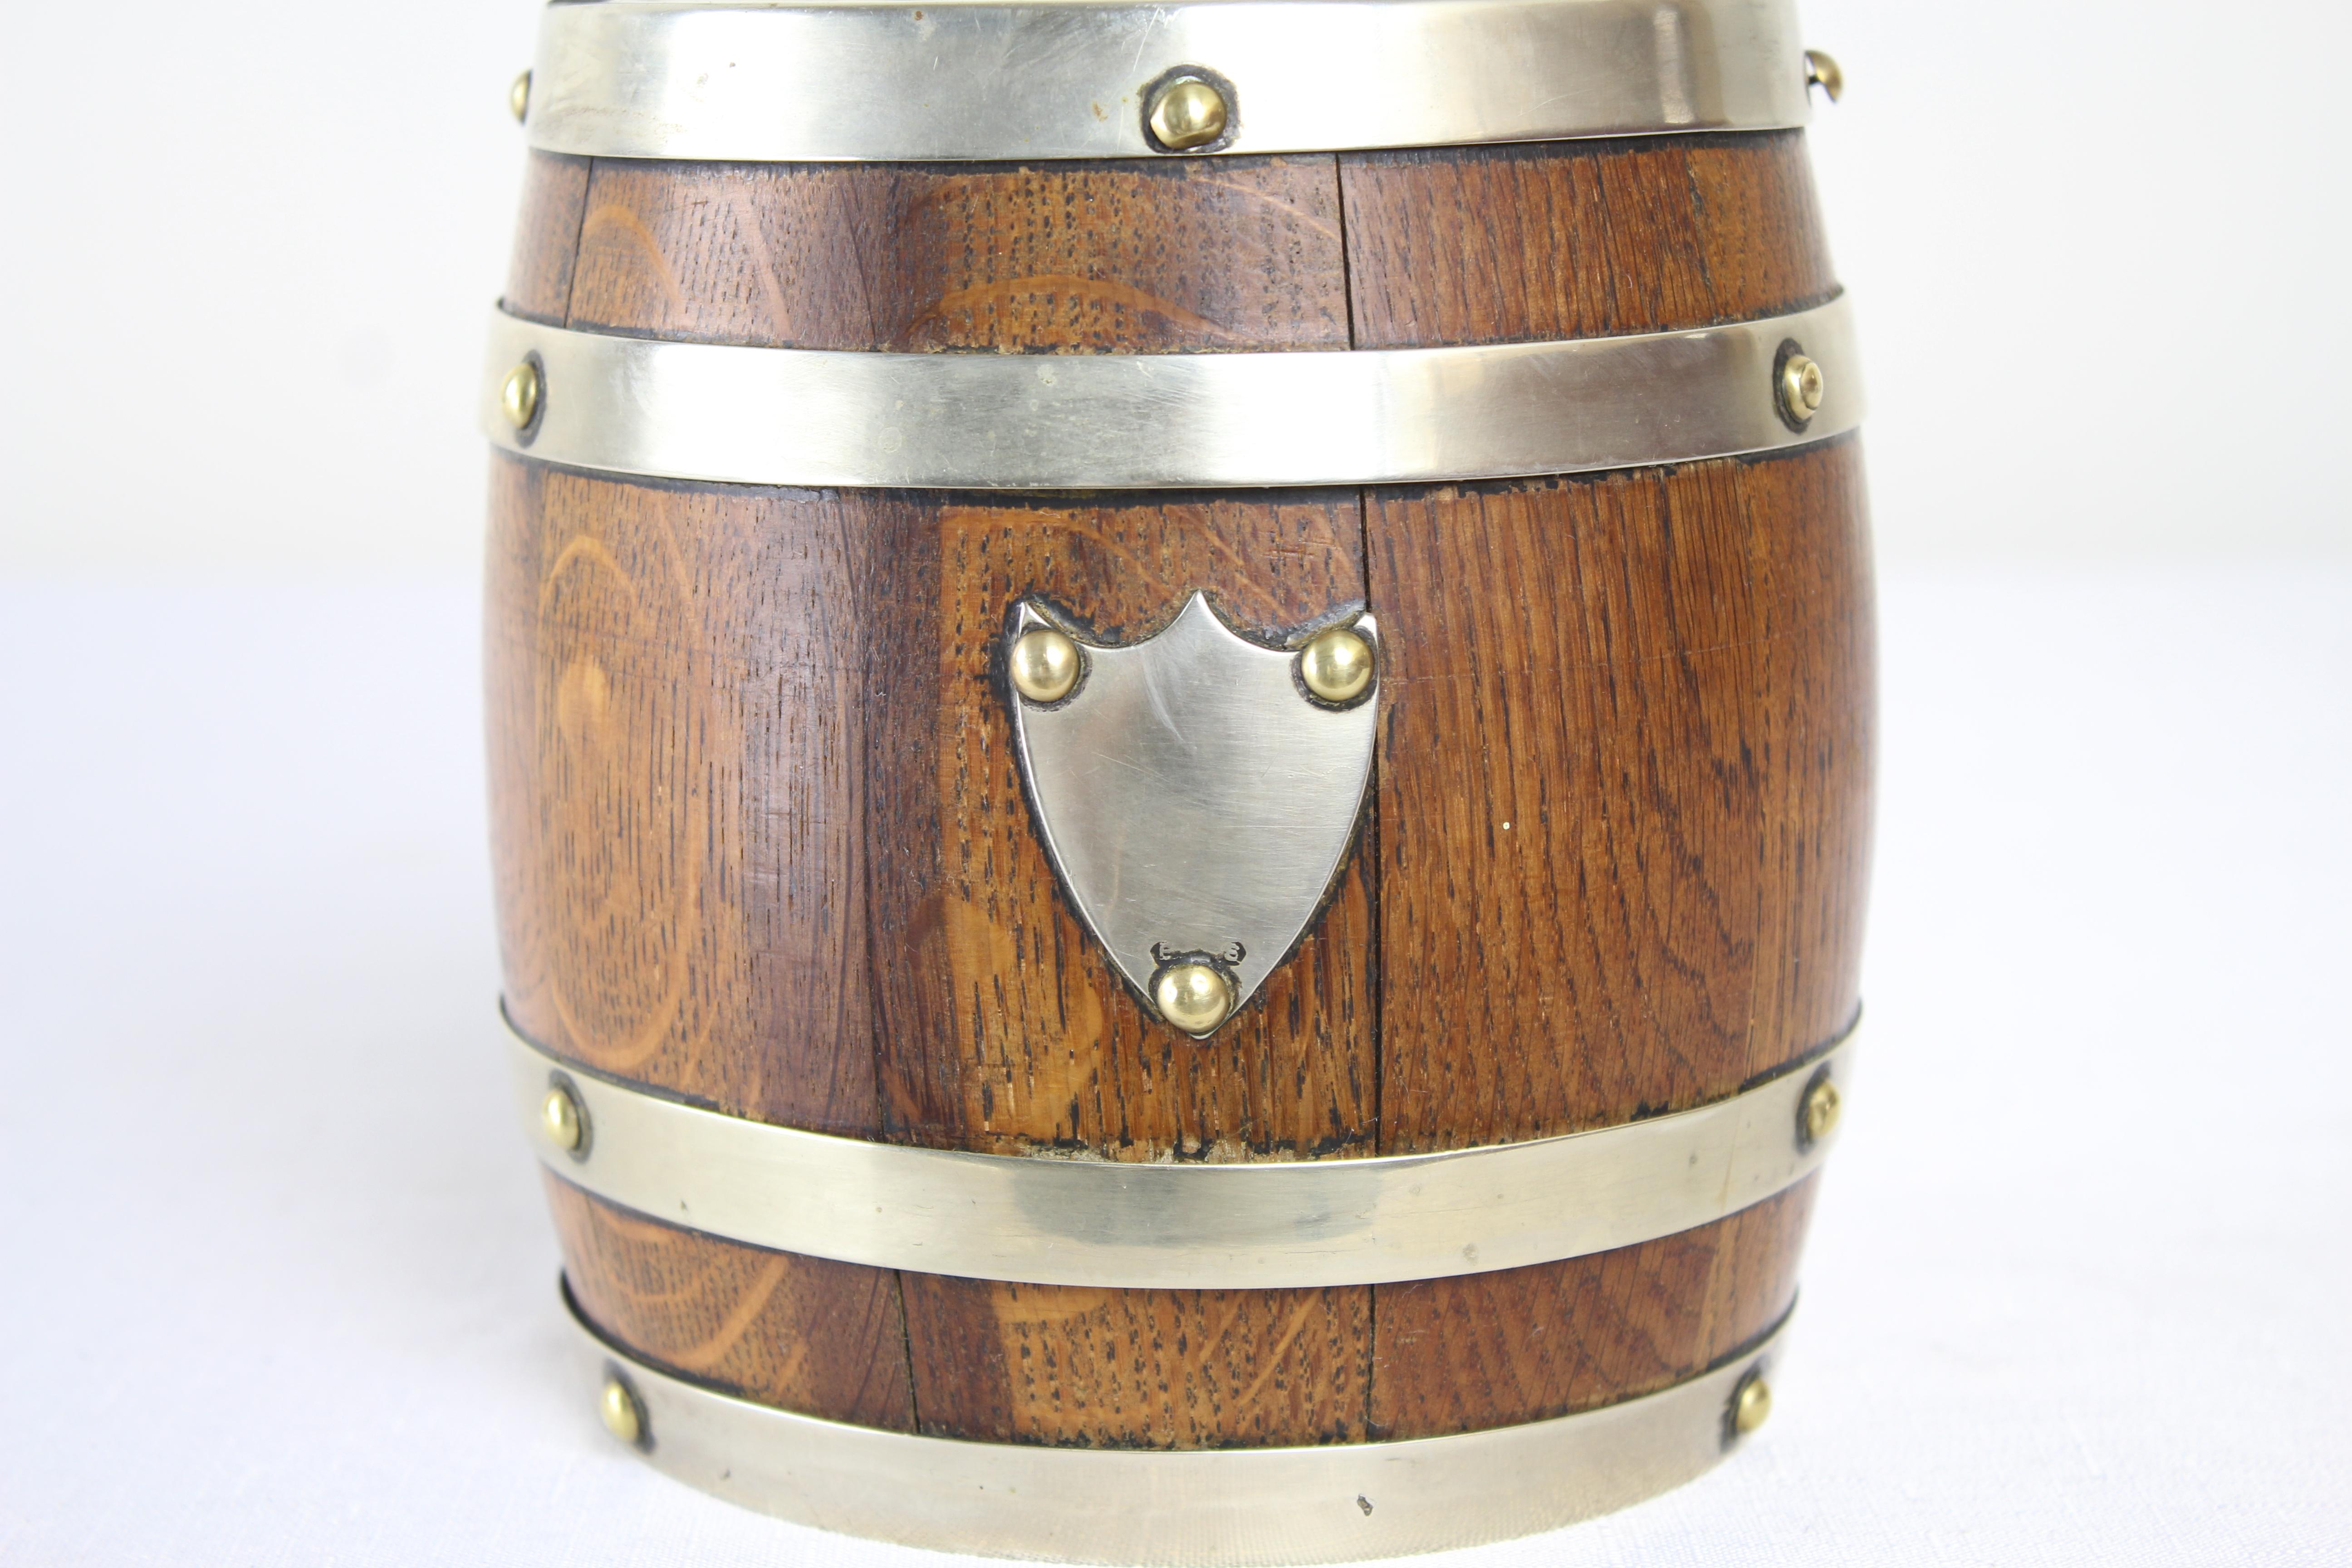 A charming oak biscuit barrel from the late 19th century. The metal is stamped “EPNS”, or Elecro Plated Nickel Silver, a metal alloy that is then silver plated. Traditional porcelain liner and sweet handle.